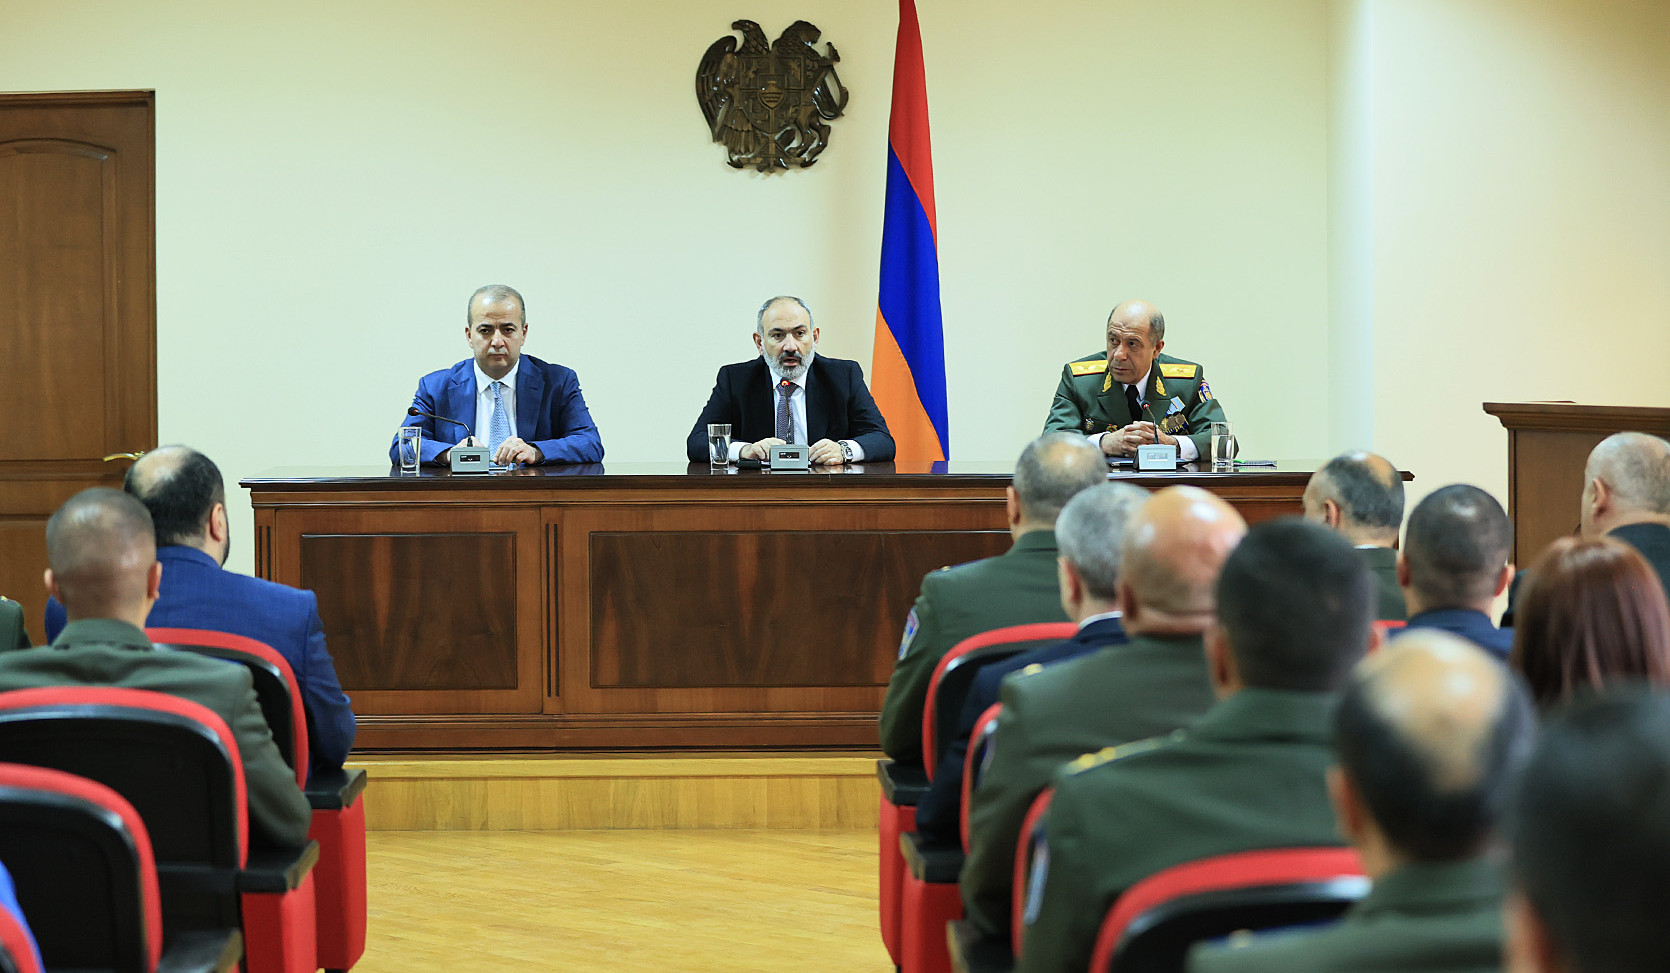 In difficult period, State Protection Service fulfilled its task, which deserves appreciation: Nikol Pashinyan